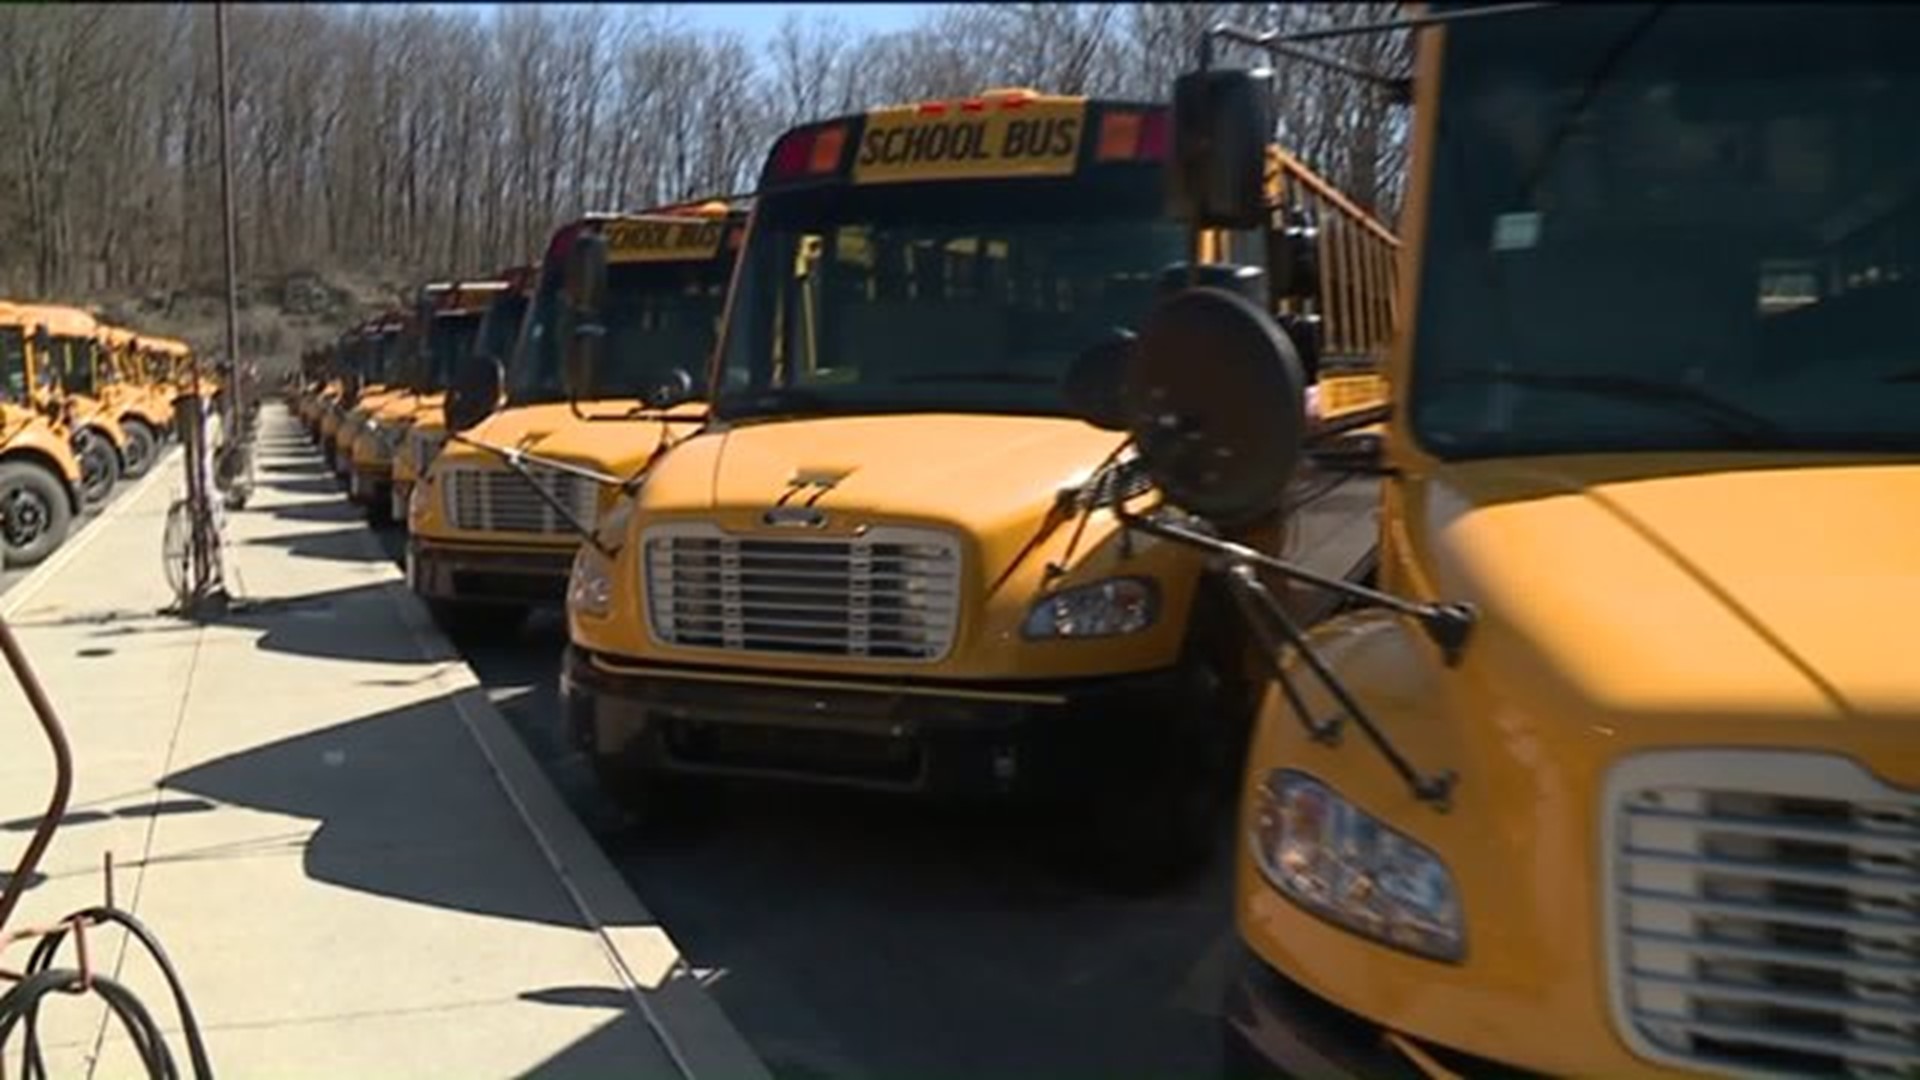 School District Opts for Propane School Buses